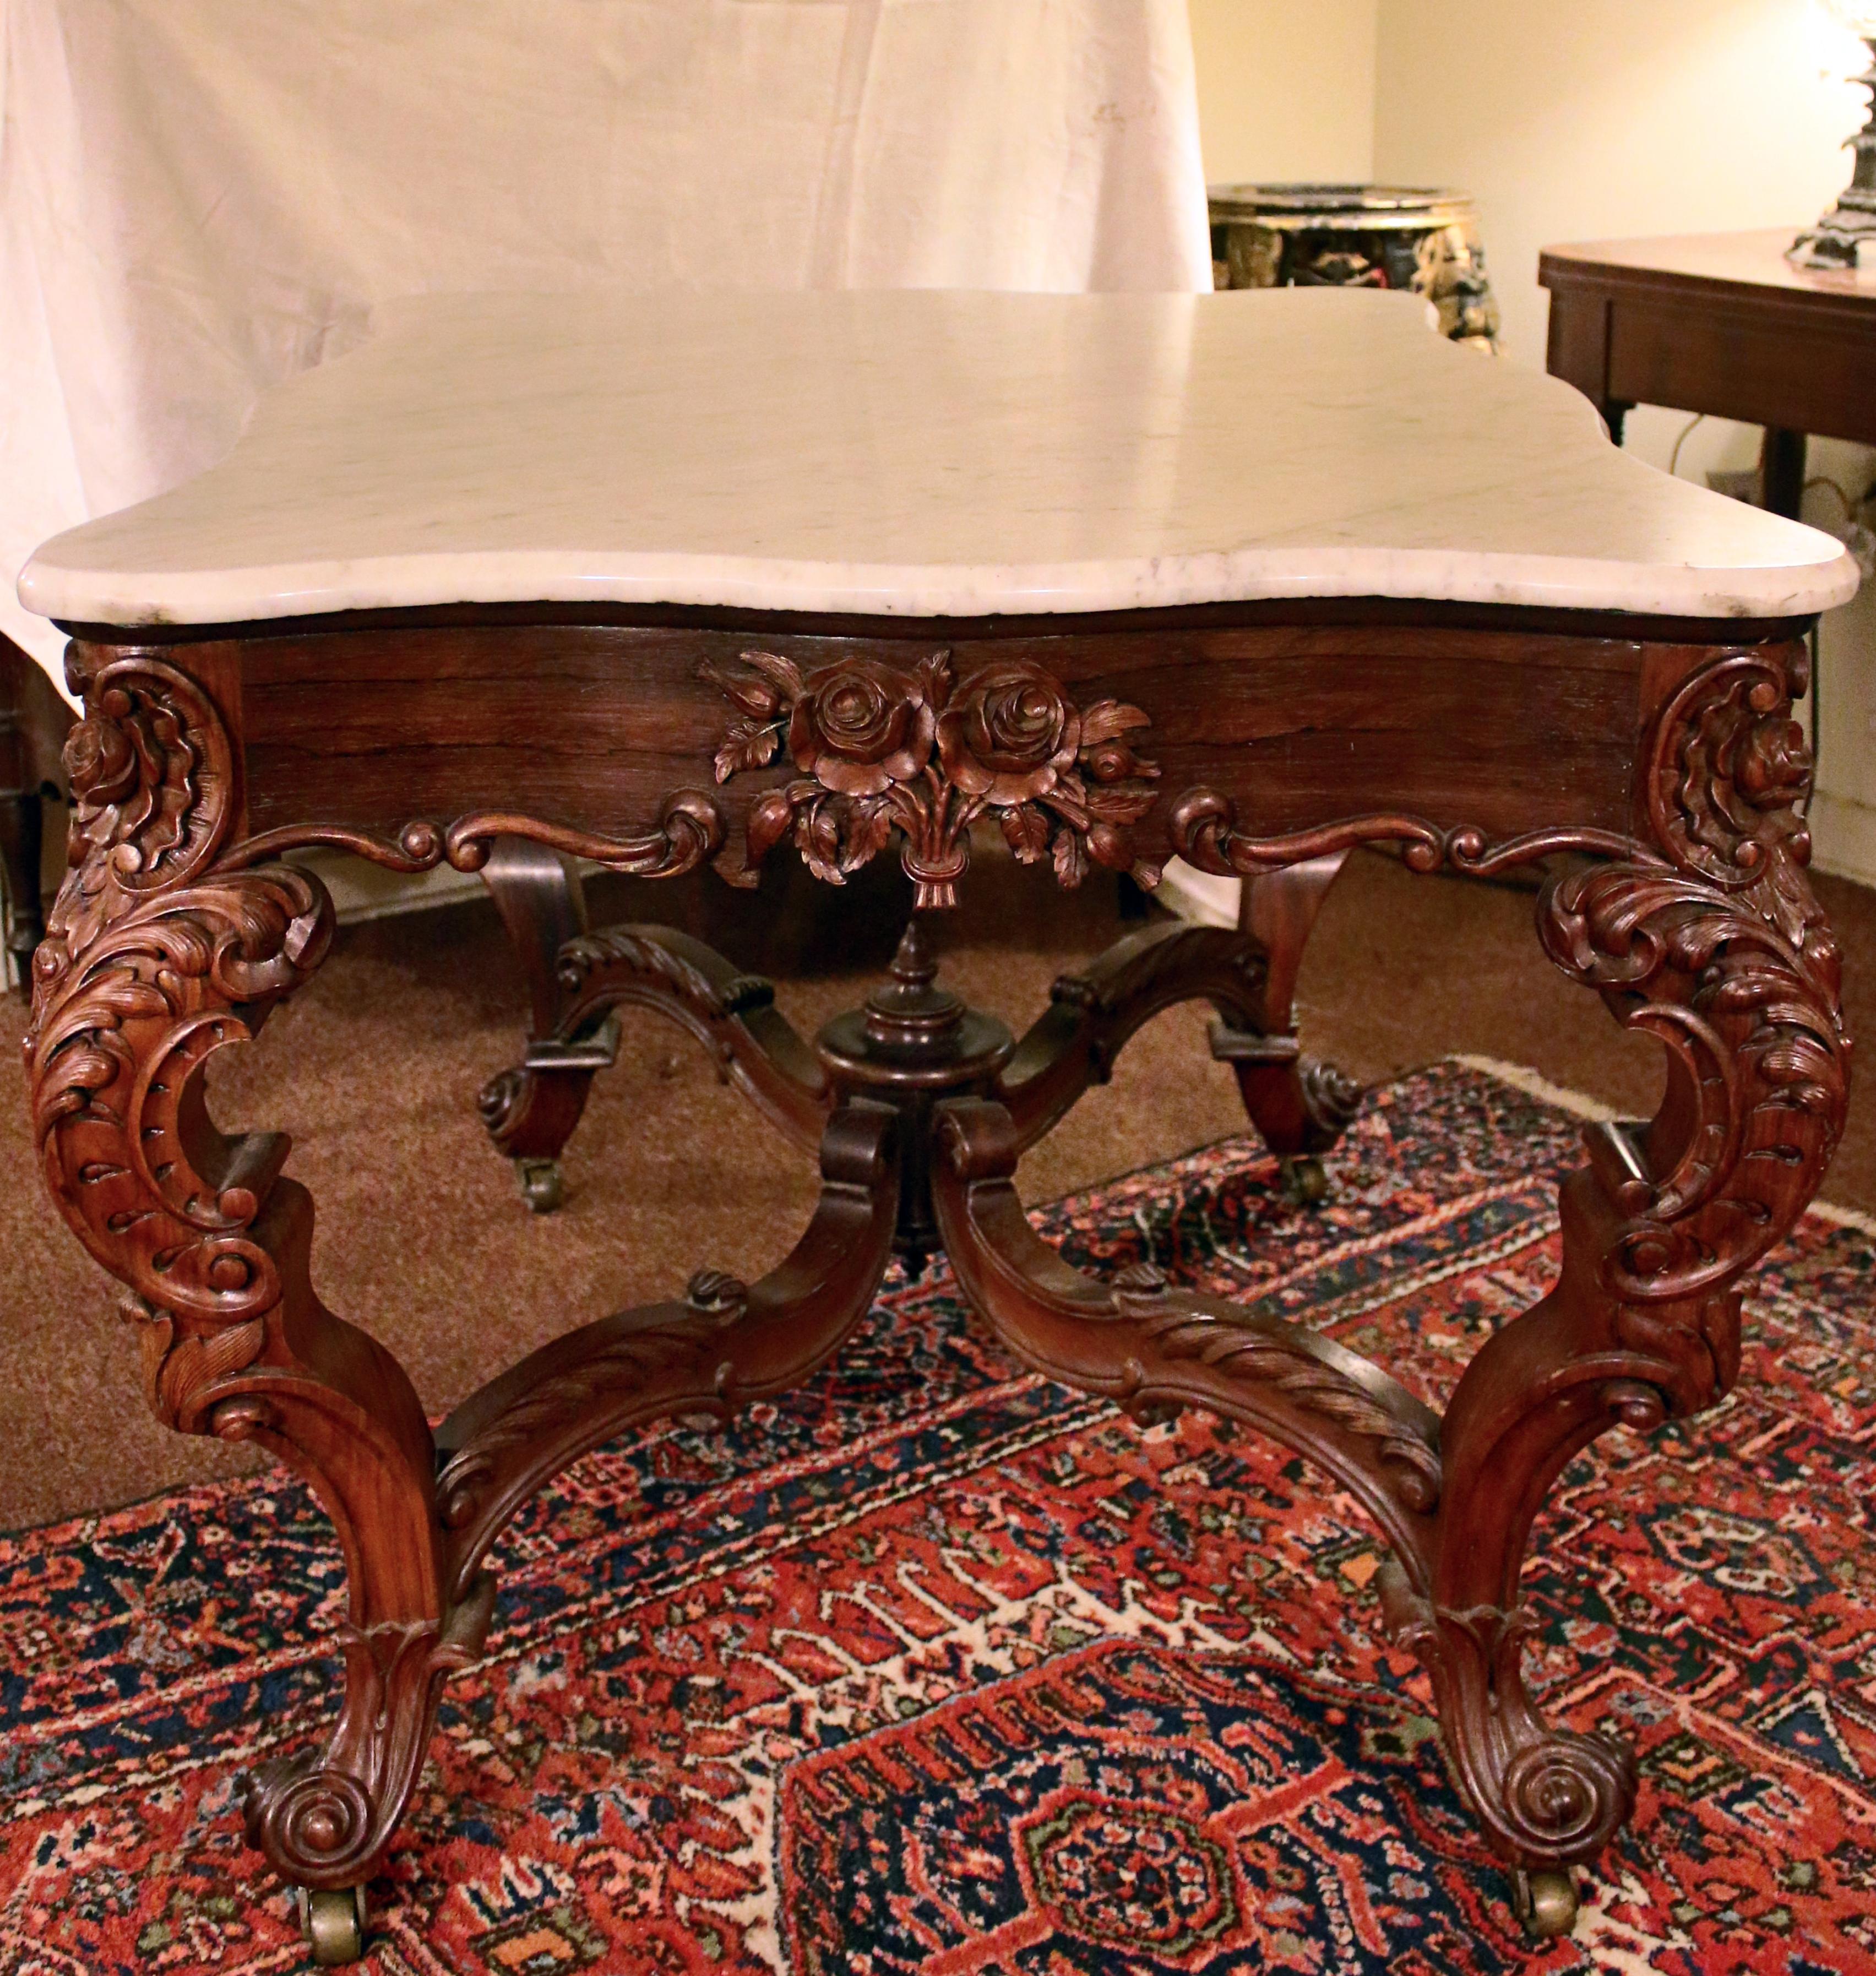 Rococo Revival center table attributed to the prestigious New York firm of Joseph Meeks. Heavily hand carved rosewood featuring floral bouquets and rosettes, graceful serpentine legs, fanciful stretchers and beveled white marble top. See